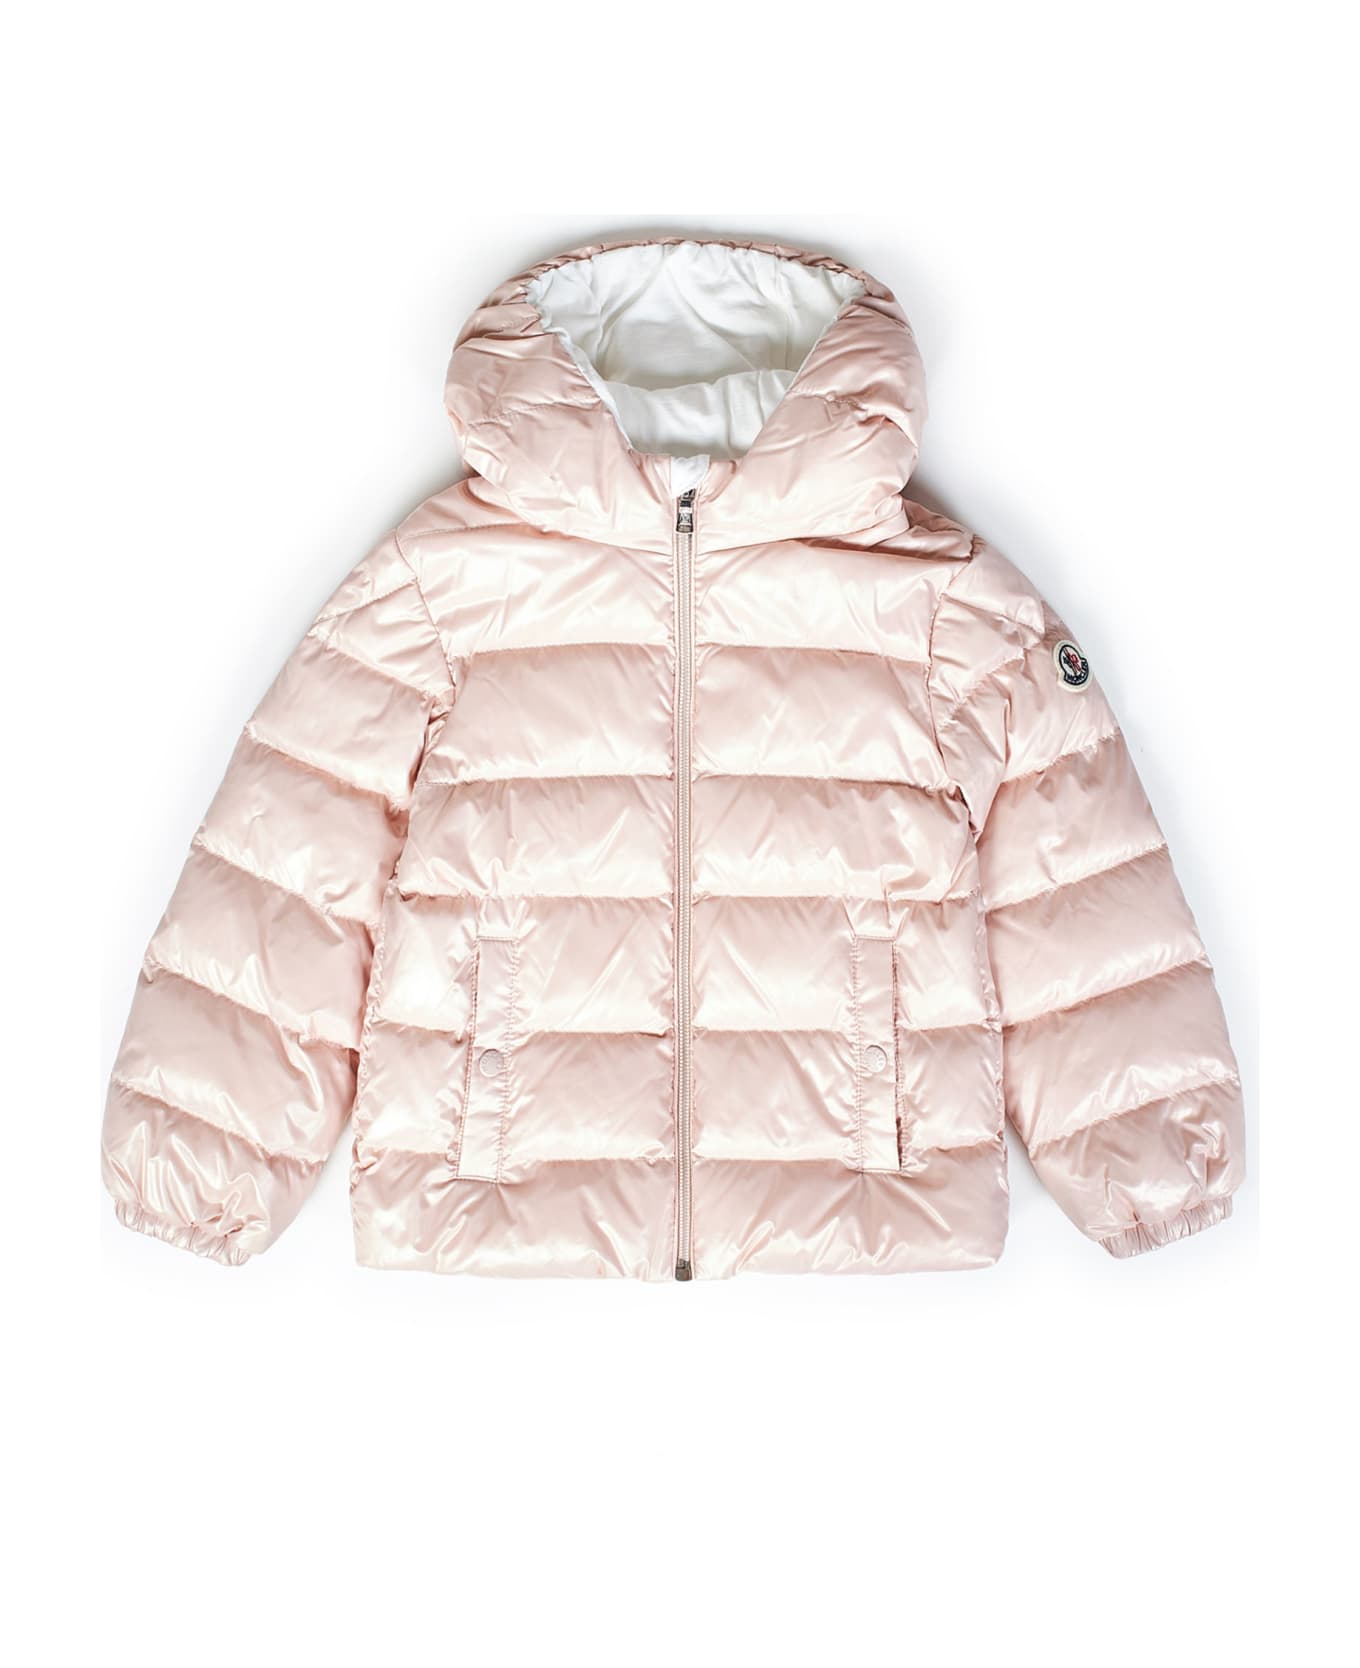 Moncler 'anand' Down Jacket - PINK